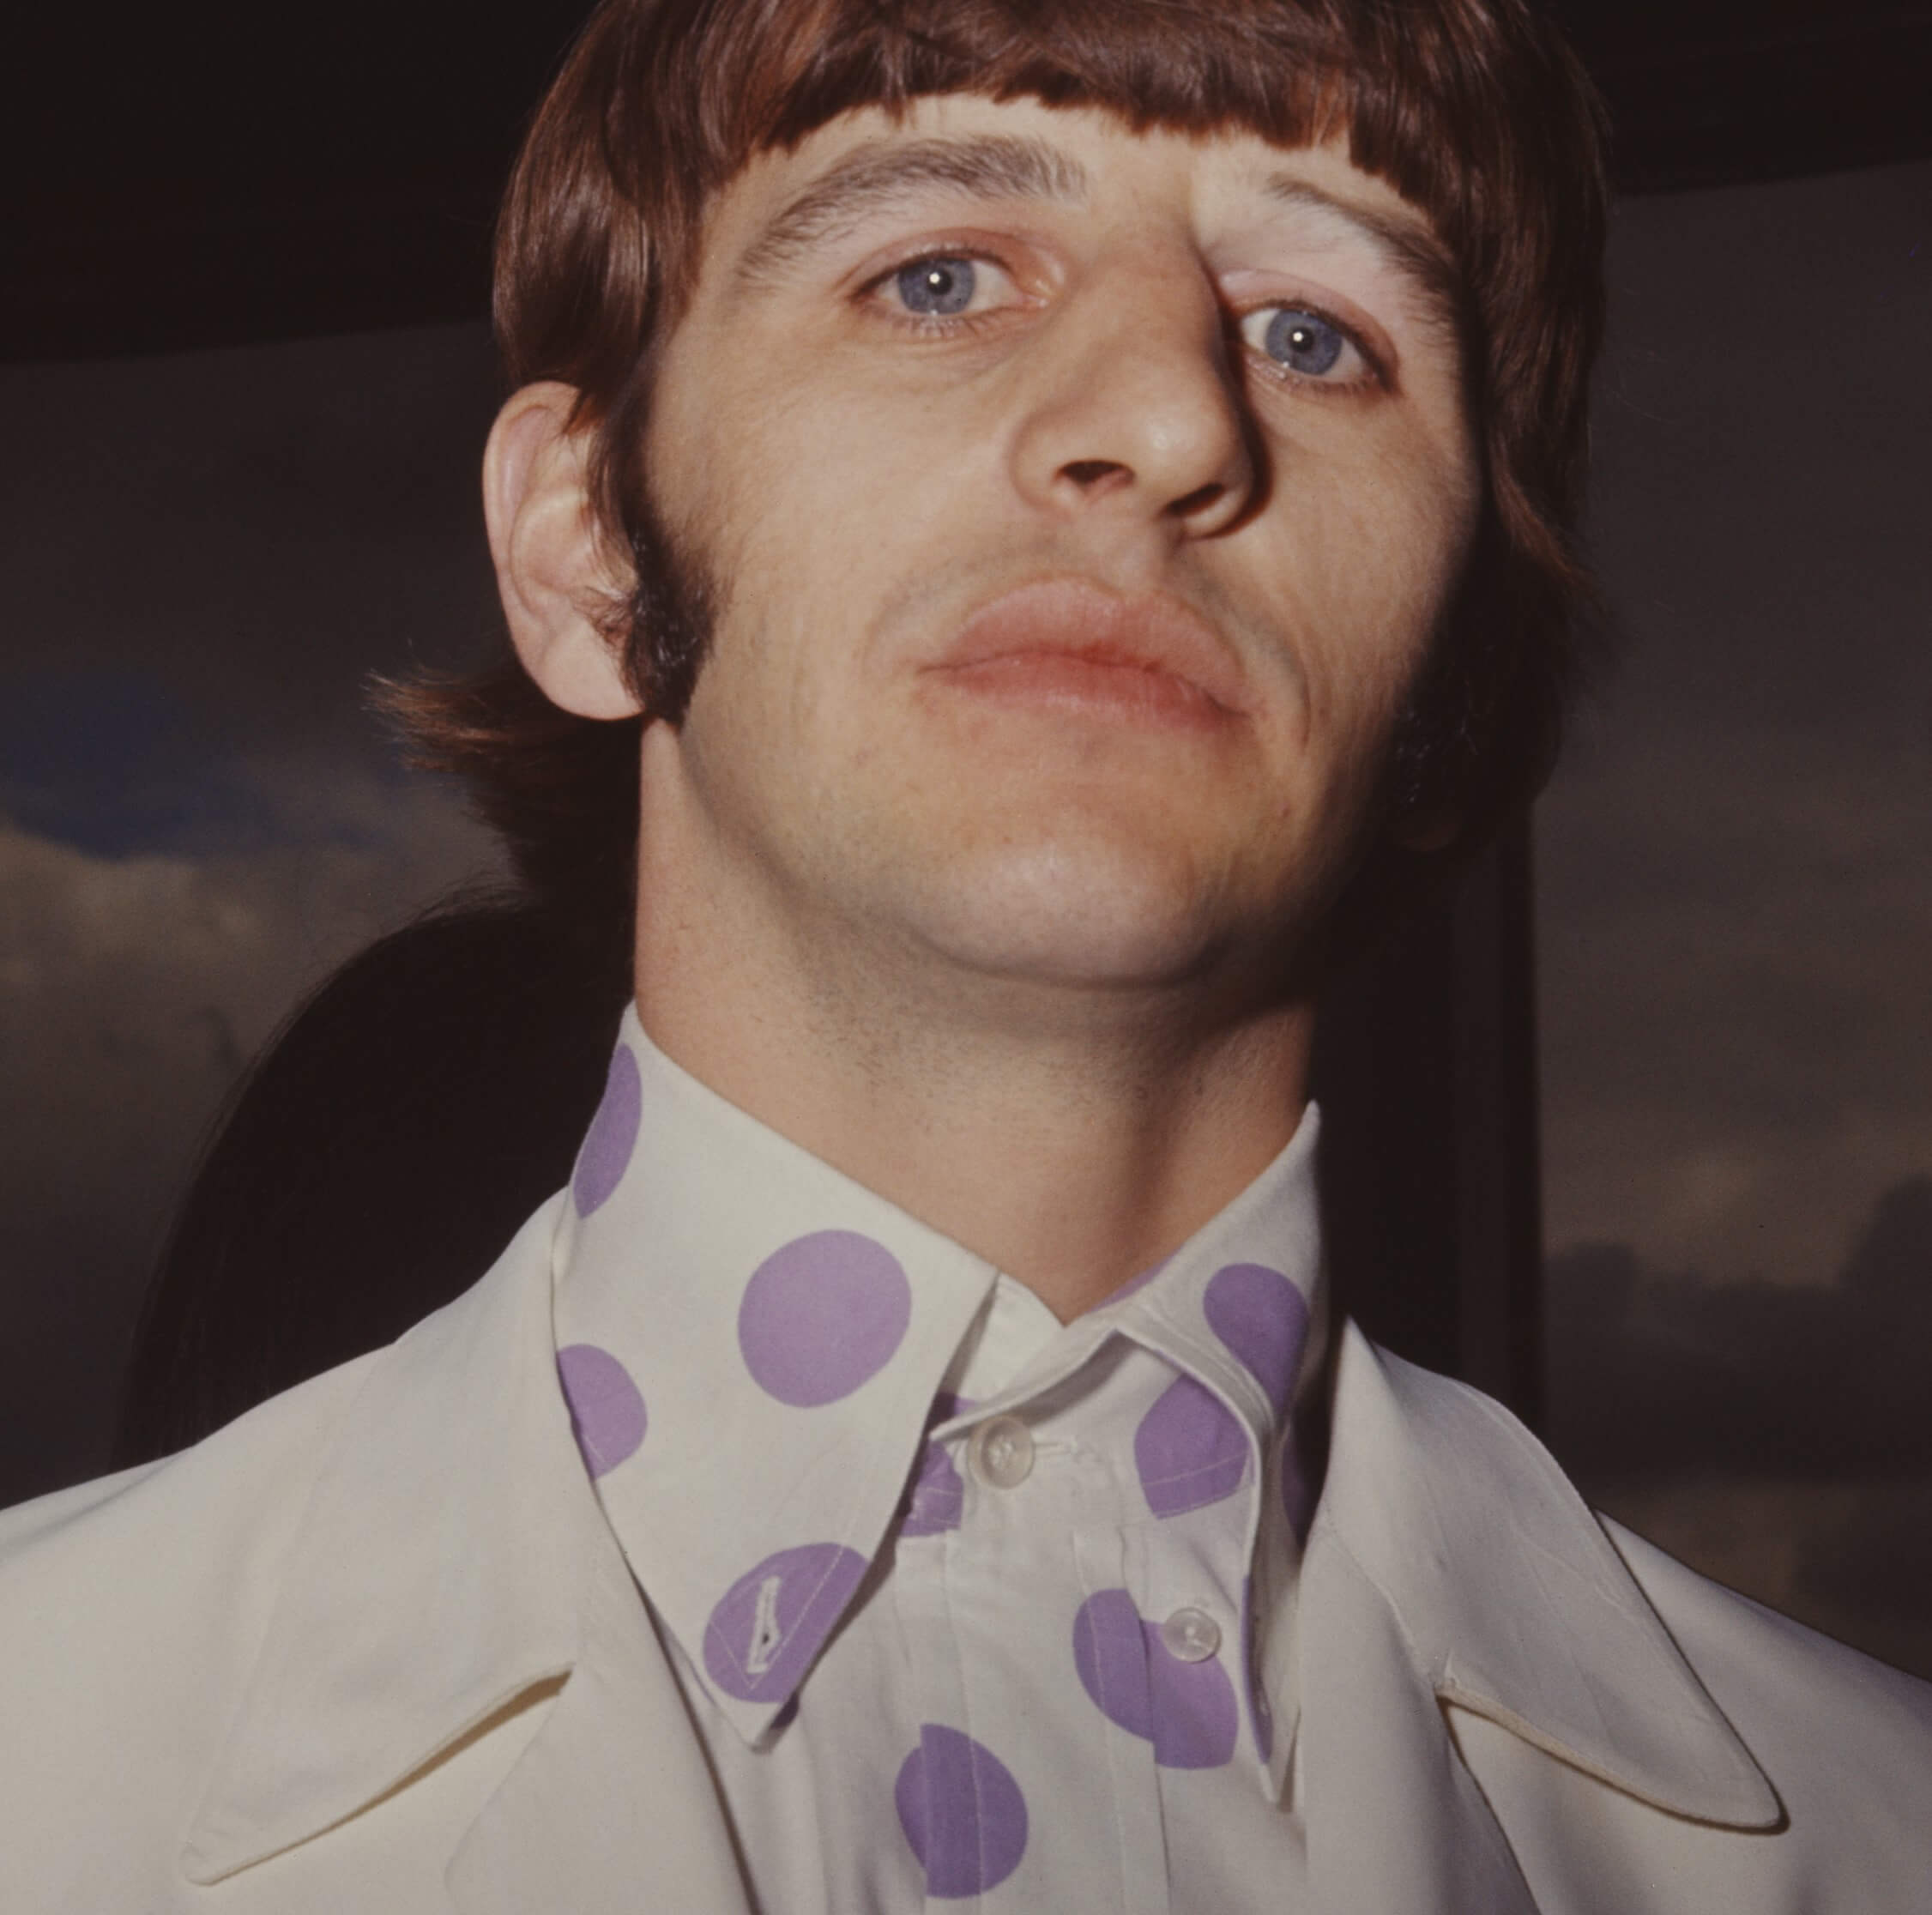 The Beatles' Ringo Starr in a white suit